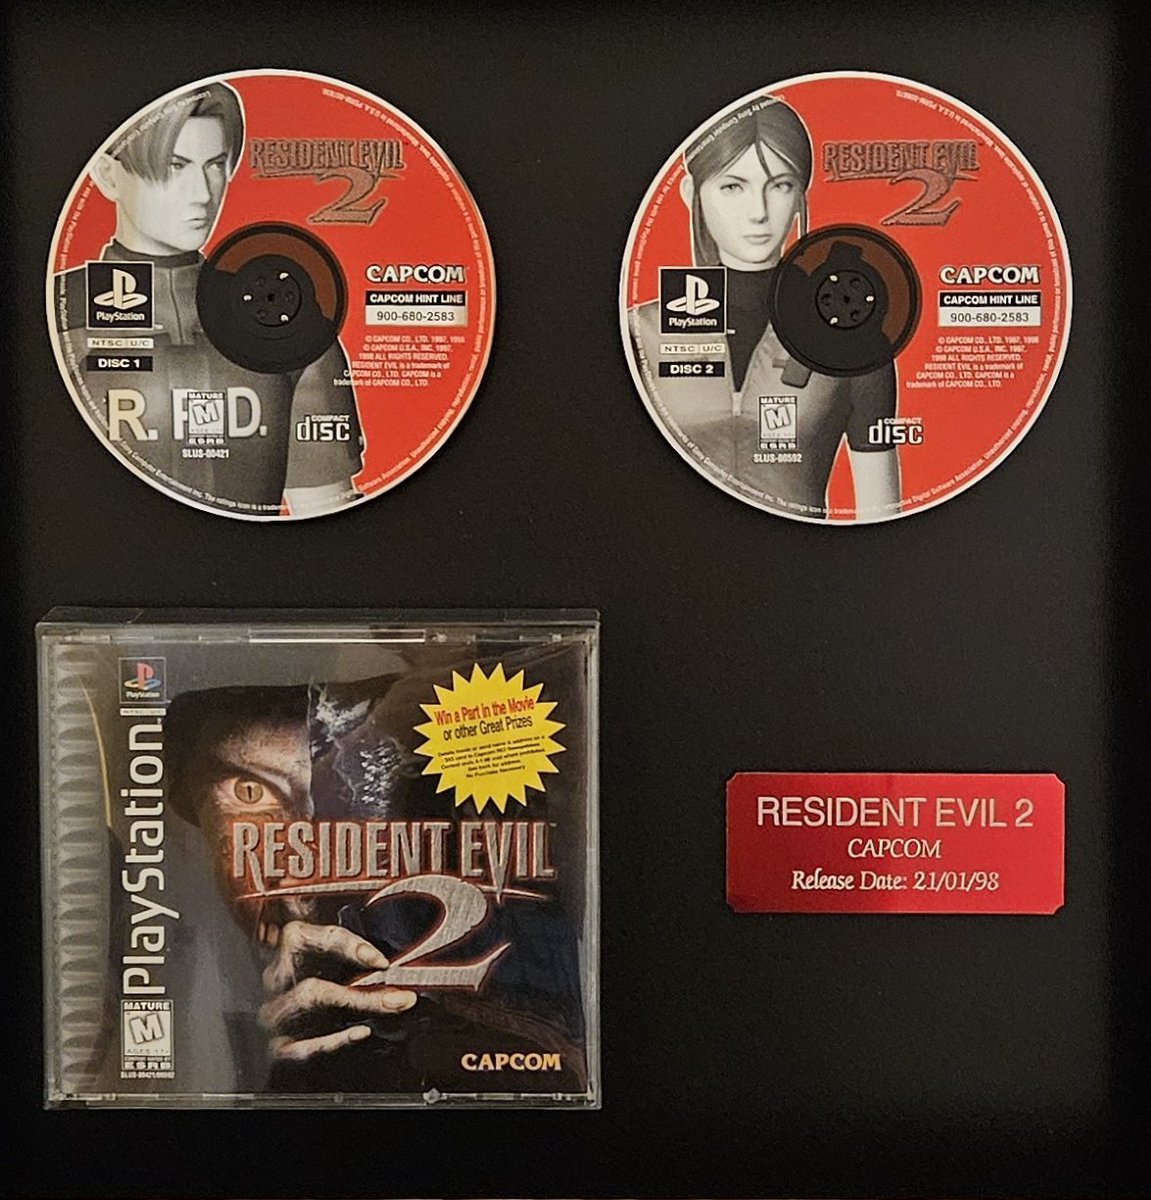 HAPPY BIRTHDAY TO MY FAVOURITE #ResidentEvil game of all time #ResidentEvil2!

Who else loves RE2 the most out of the series?

#Framedgame #capcom #PlayStation #SonyPlayStation #Gamer #Gaming